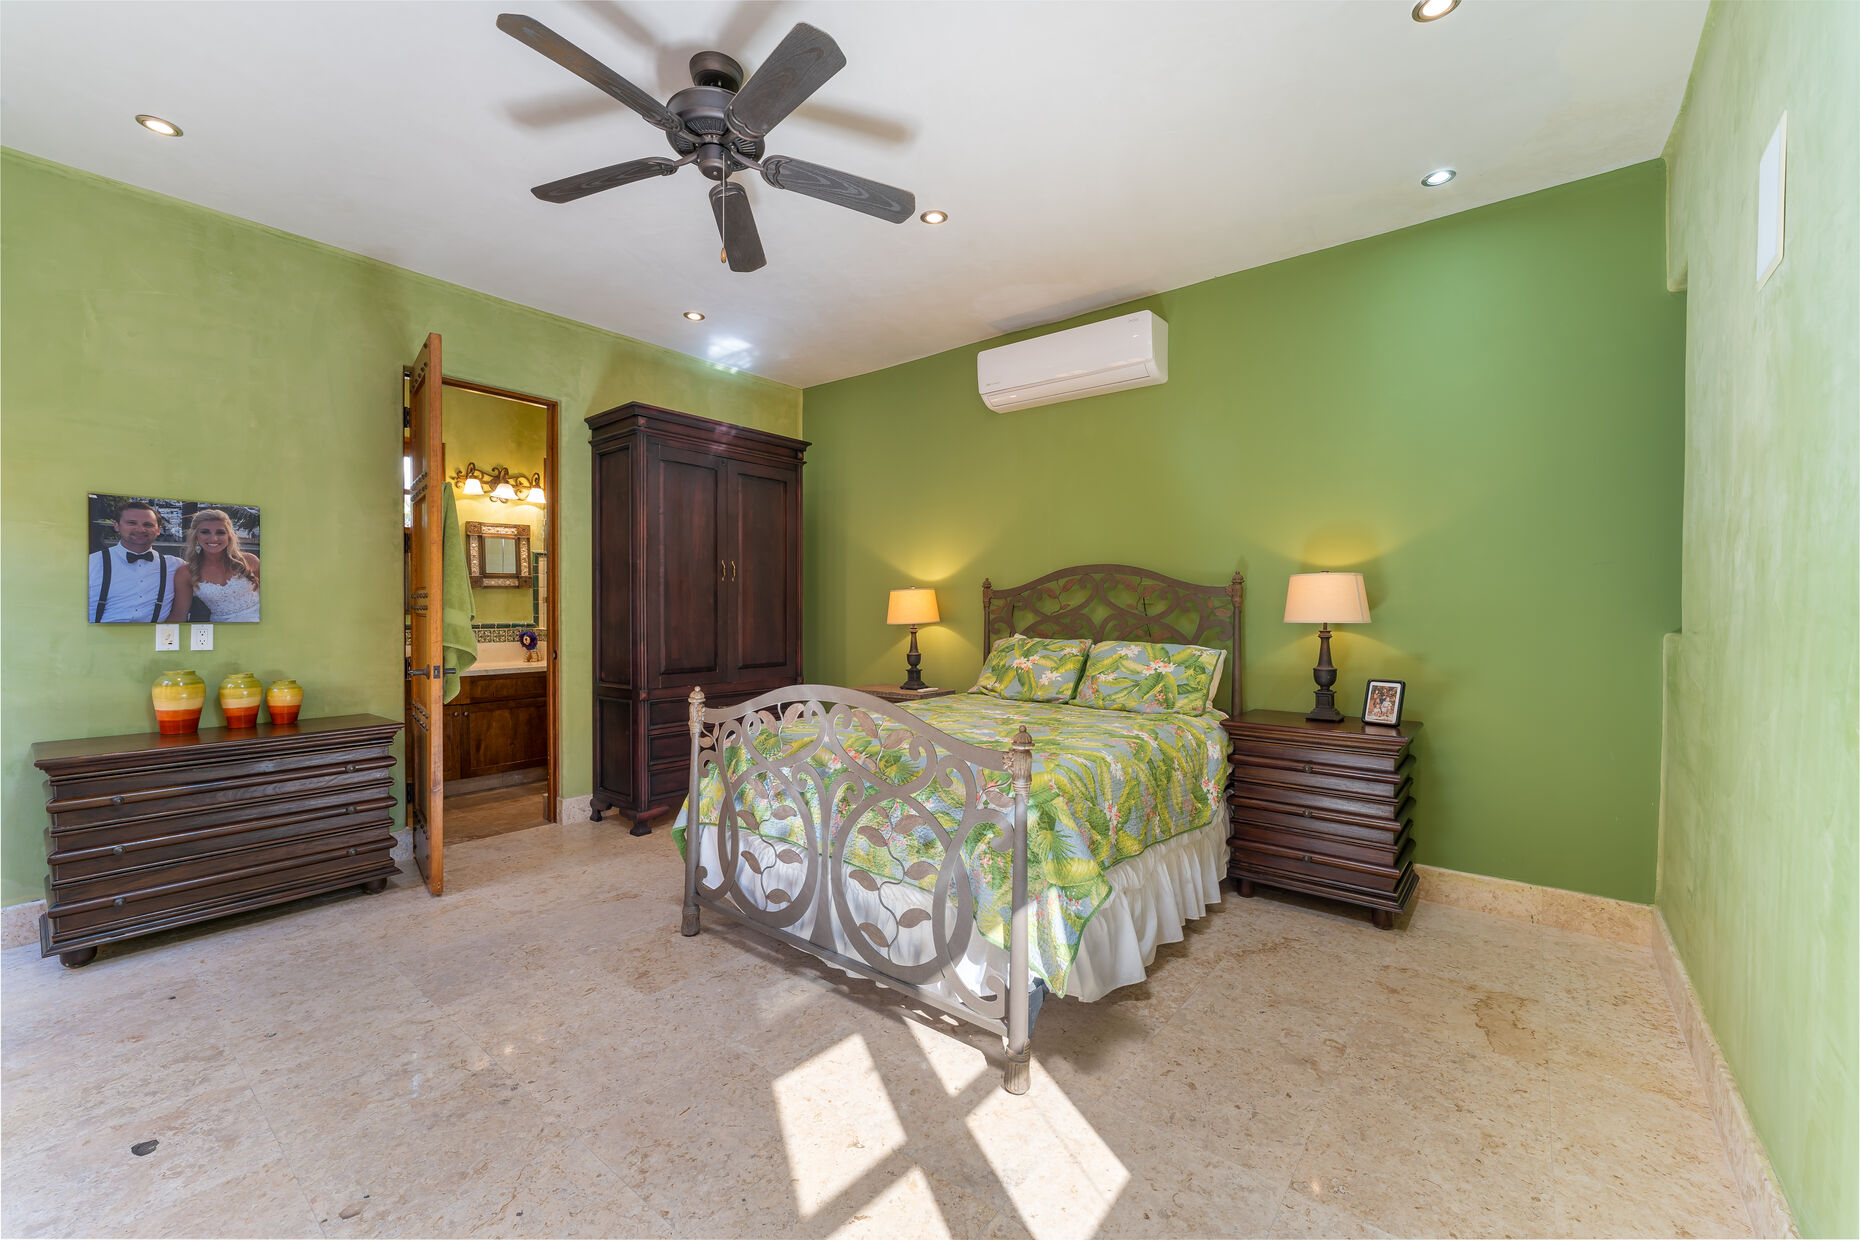 Downstairs Bedroom 3 / Ceiling Fan/ Air conditioning/ Internet / Full Bed